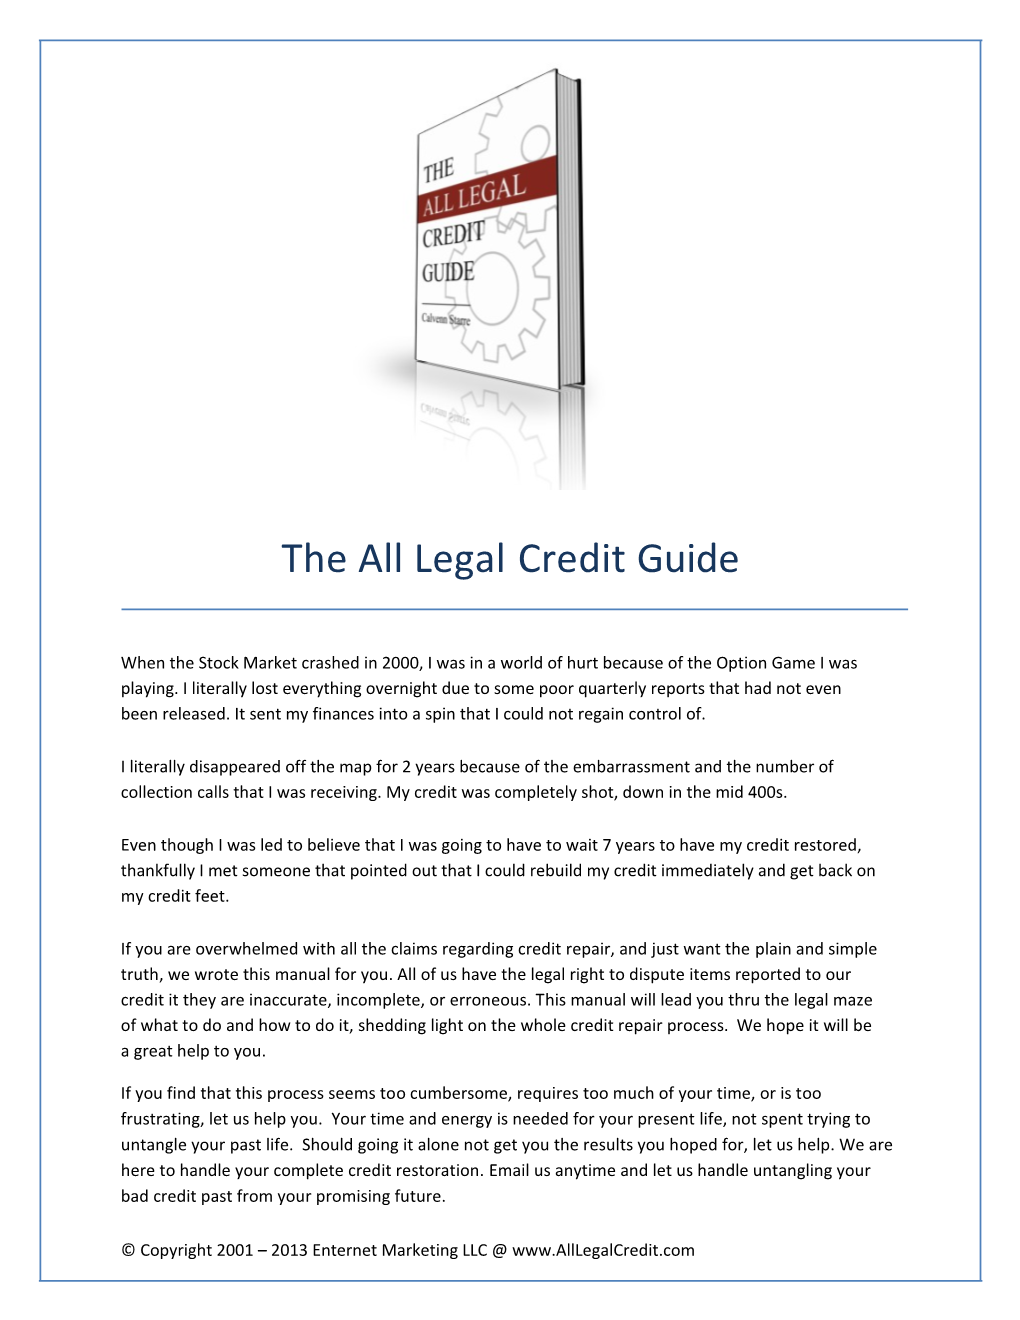 All Legal Credit Guide